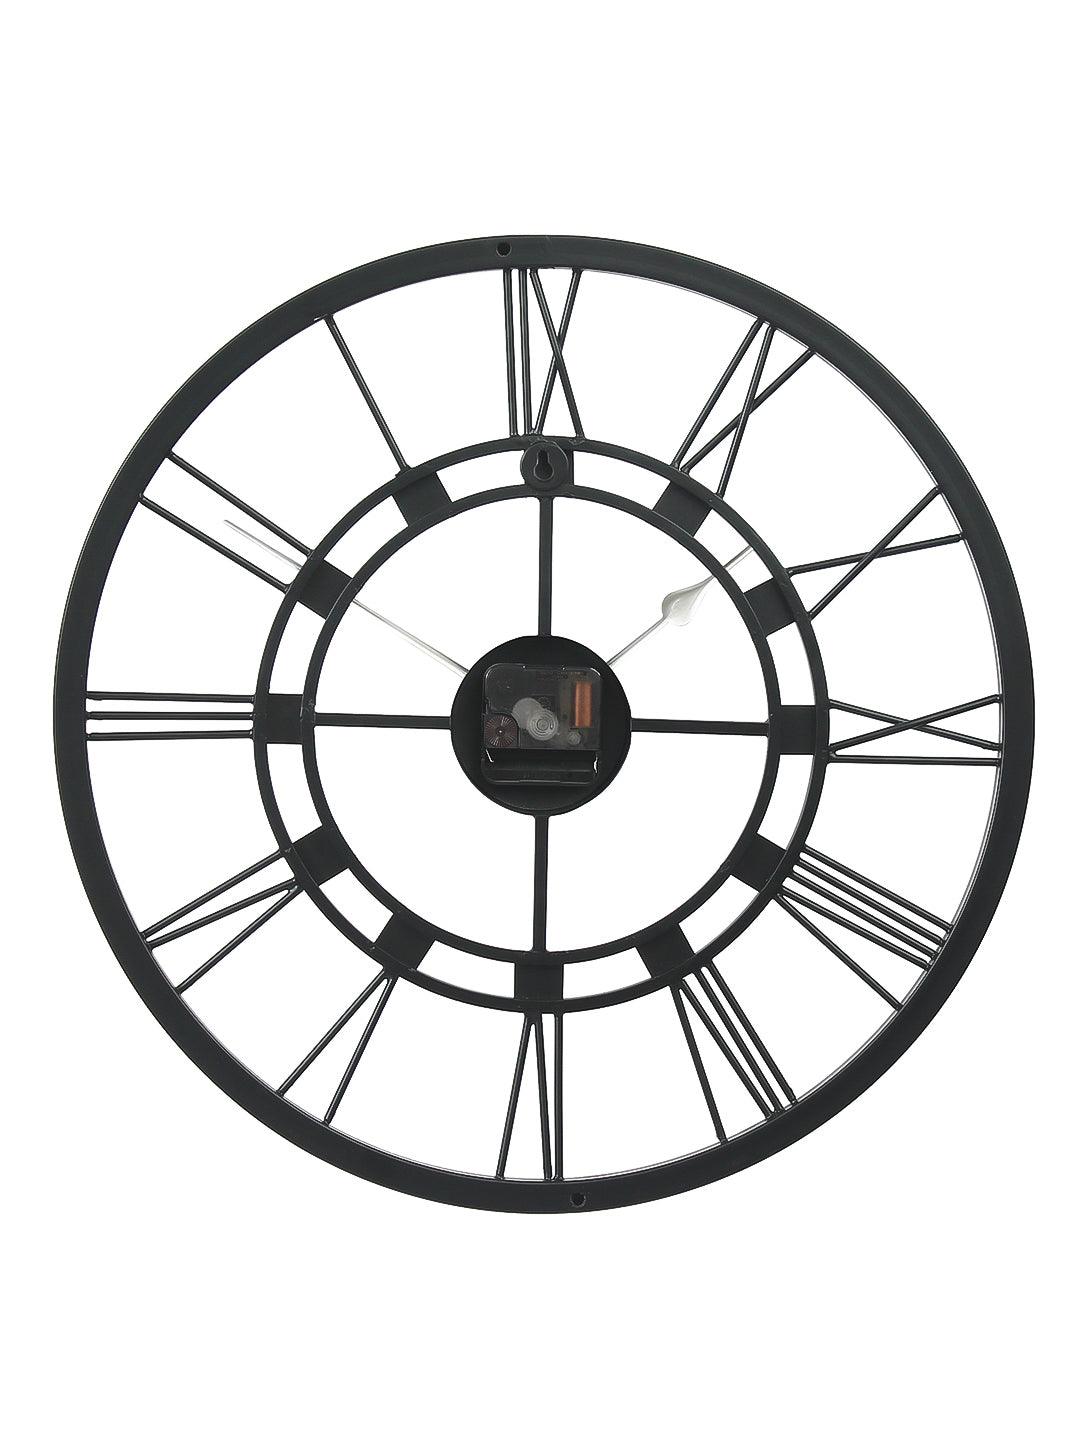 Black Iron Round Handcrafted Analog Roman Number Wall Clock Without Glass 6